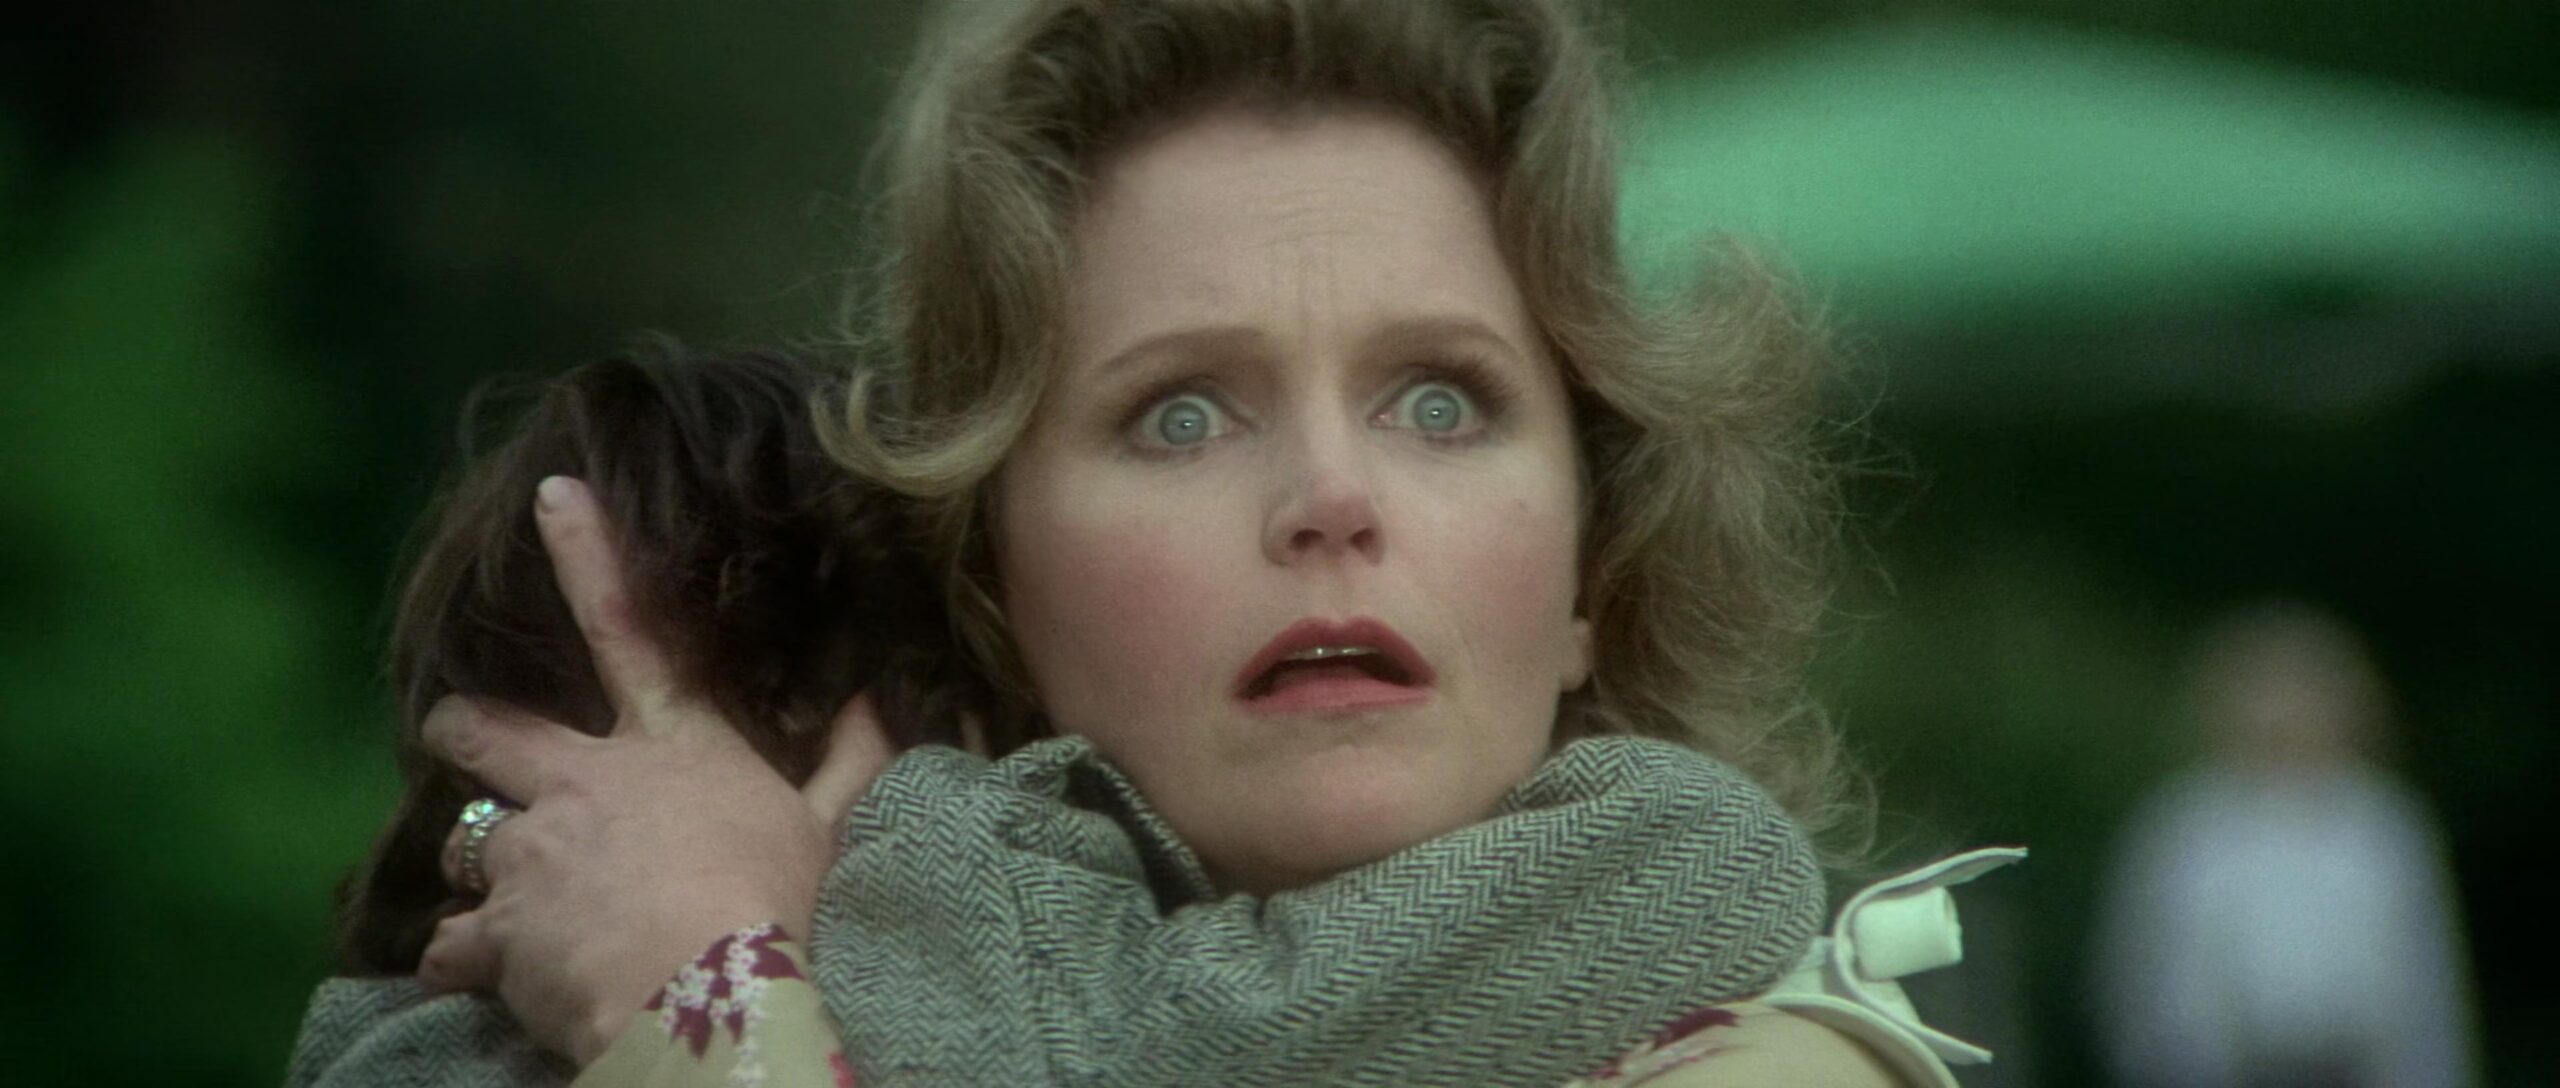 Lee Remick in The Omen